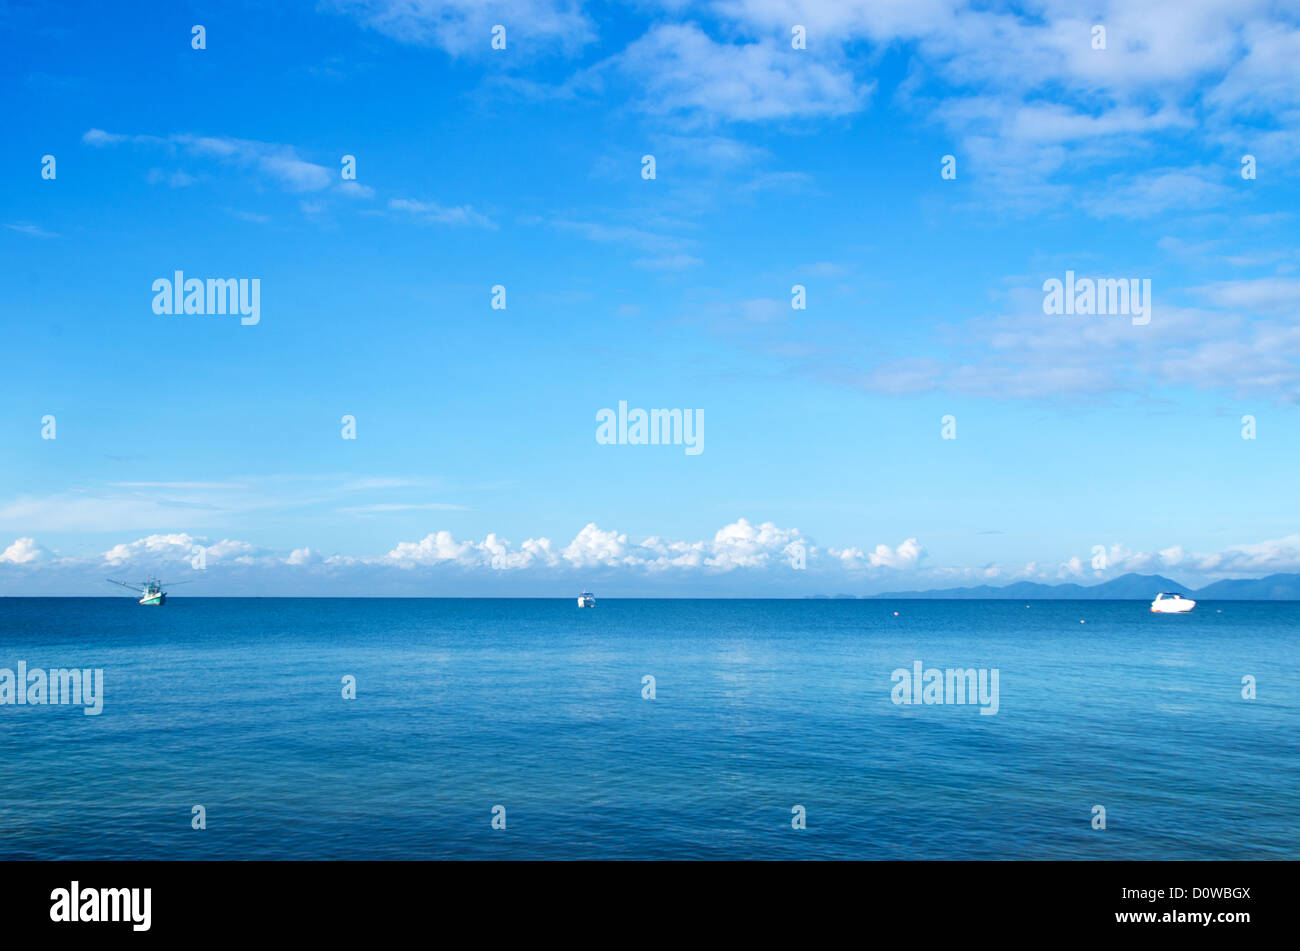 cloudy blue sky above a surface of the sea Stock Photo